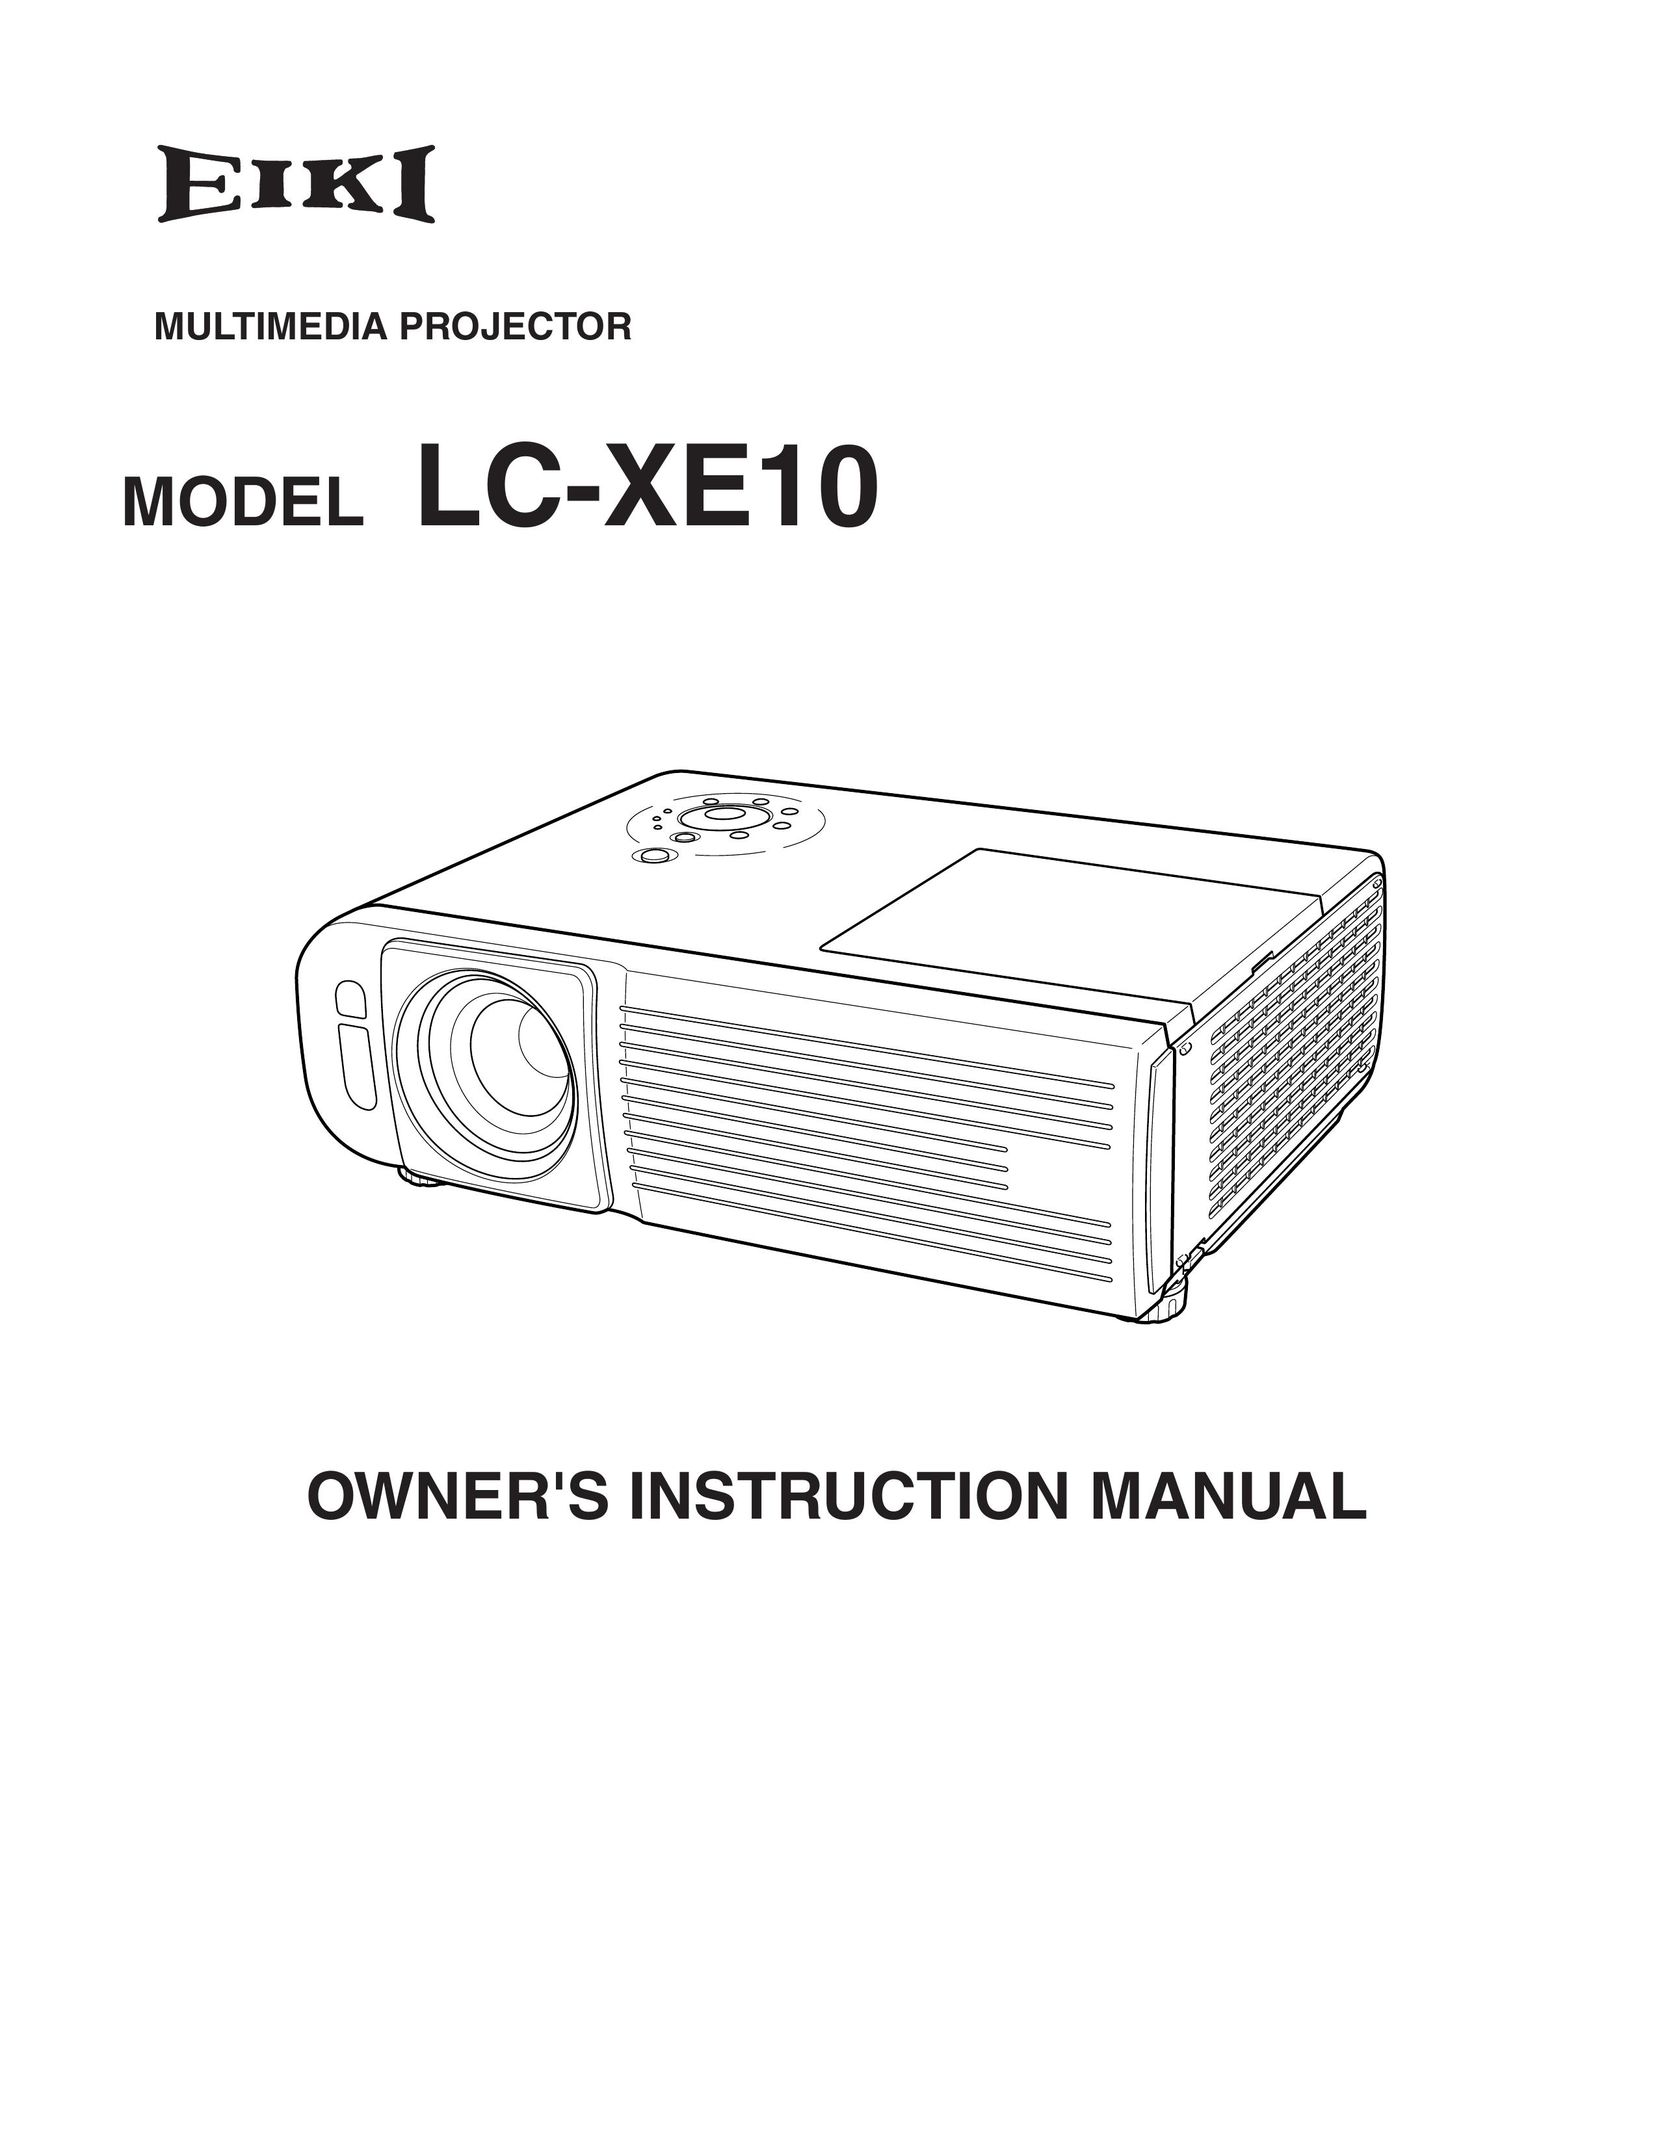 Eiki LC-XE10 Projection Television User Manual